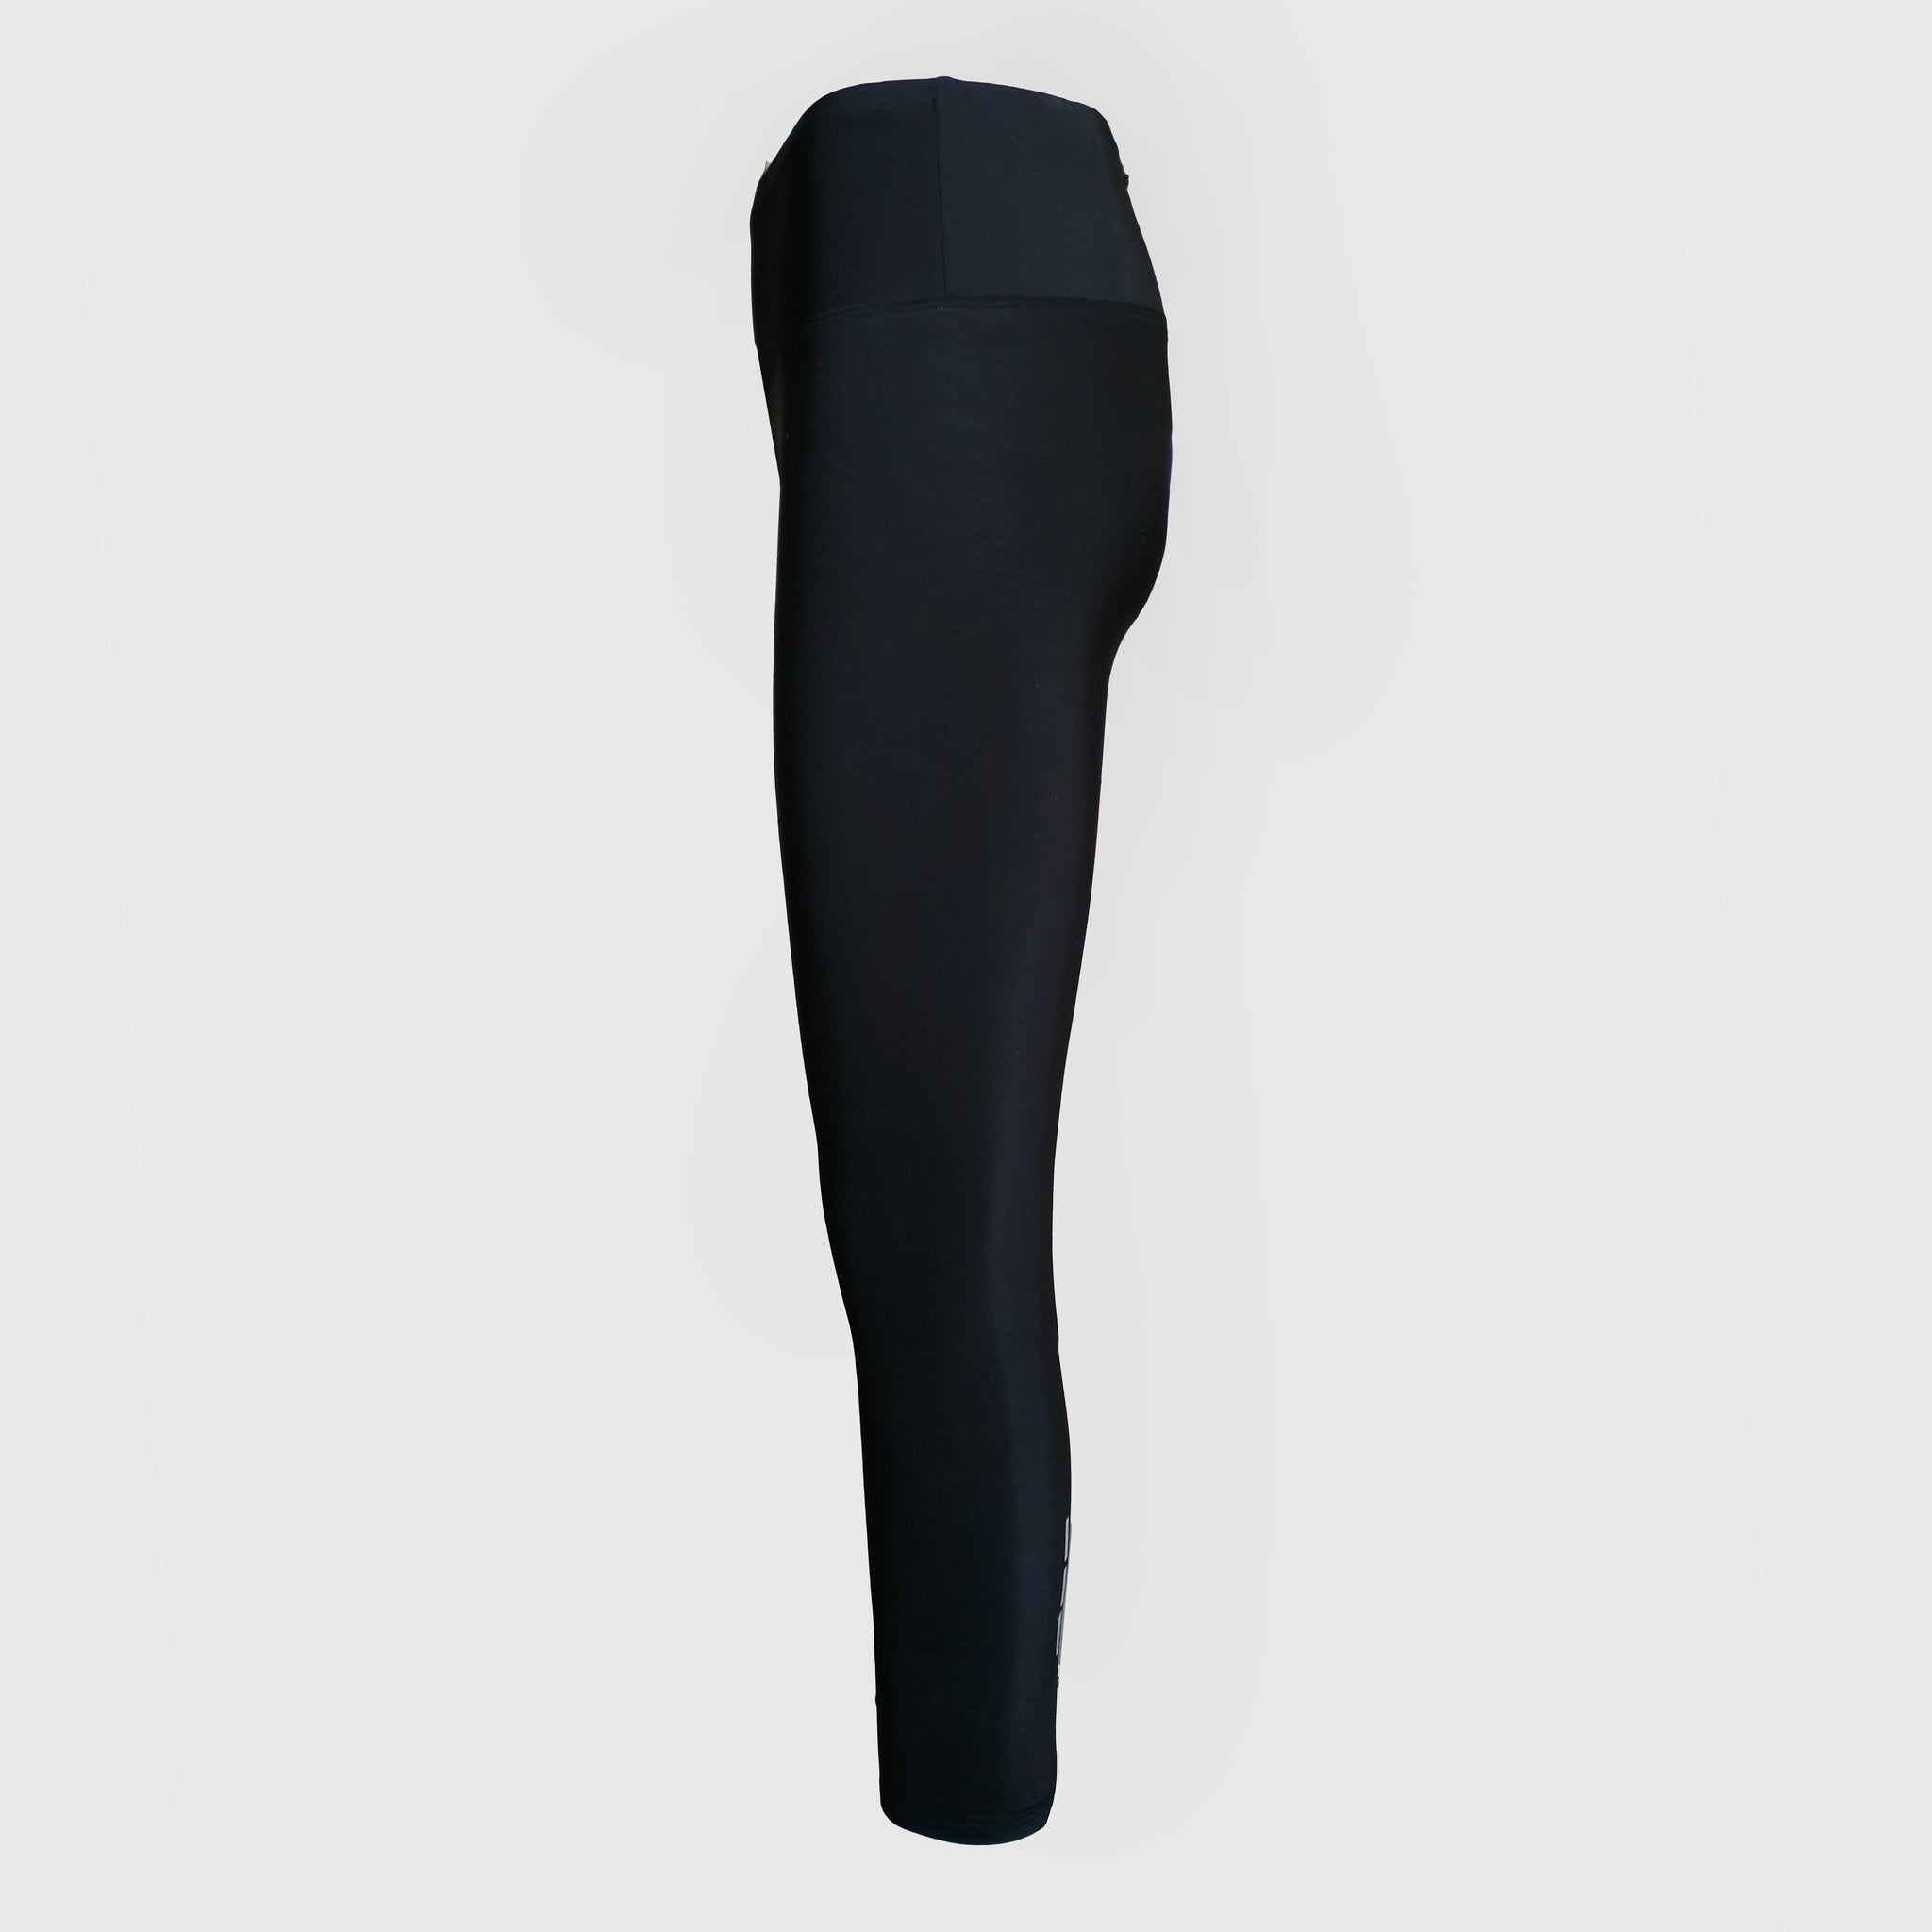 High waist winter leggings with back pocket and reflectors - RAVEN